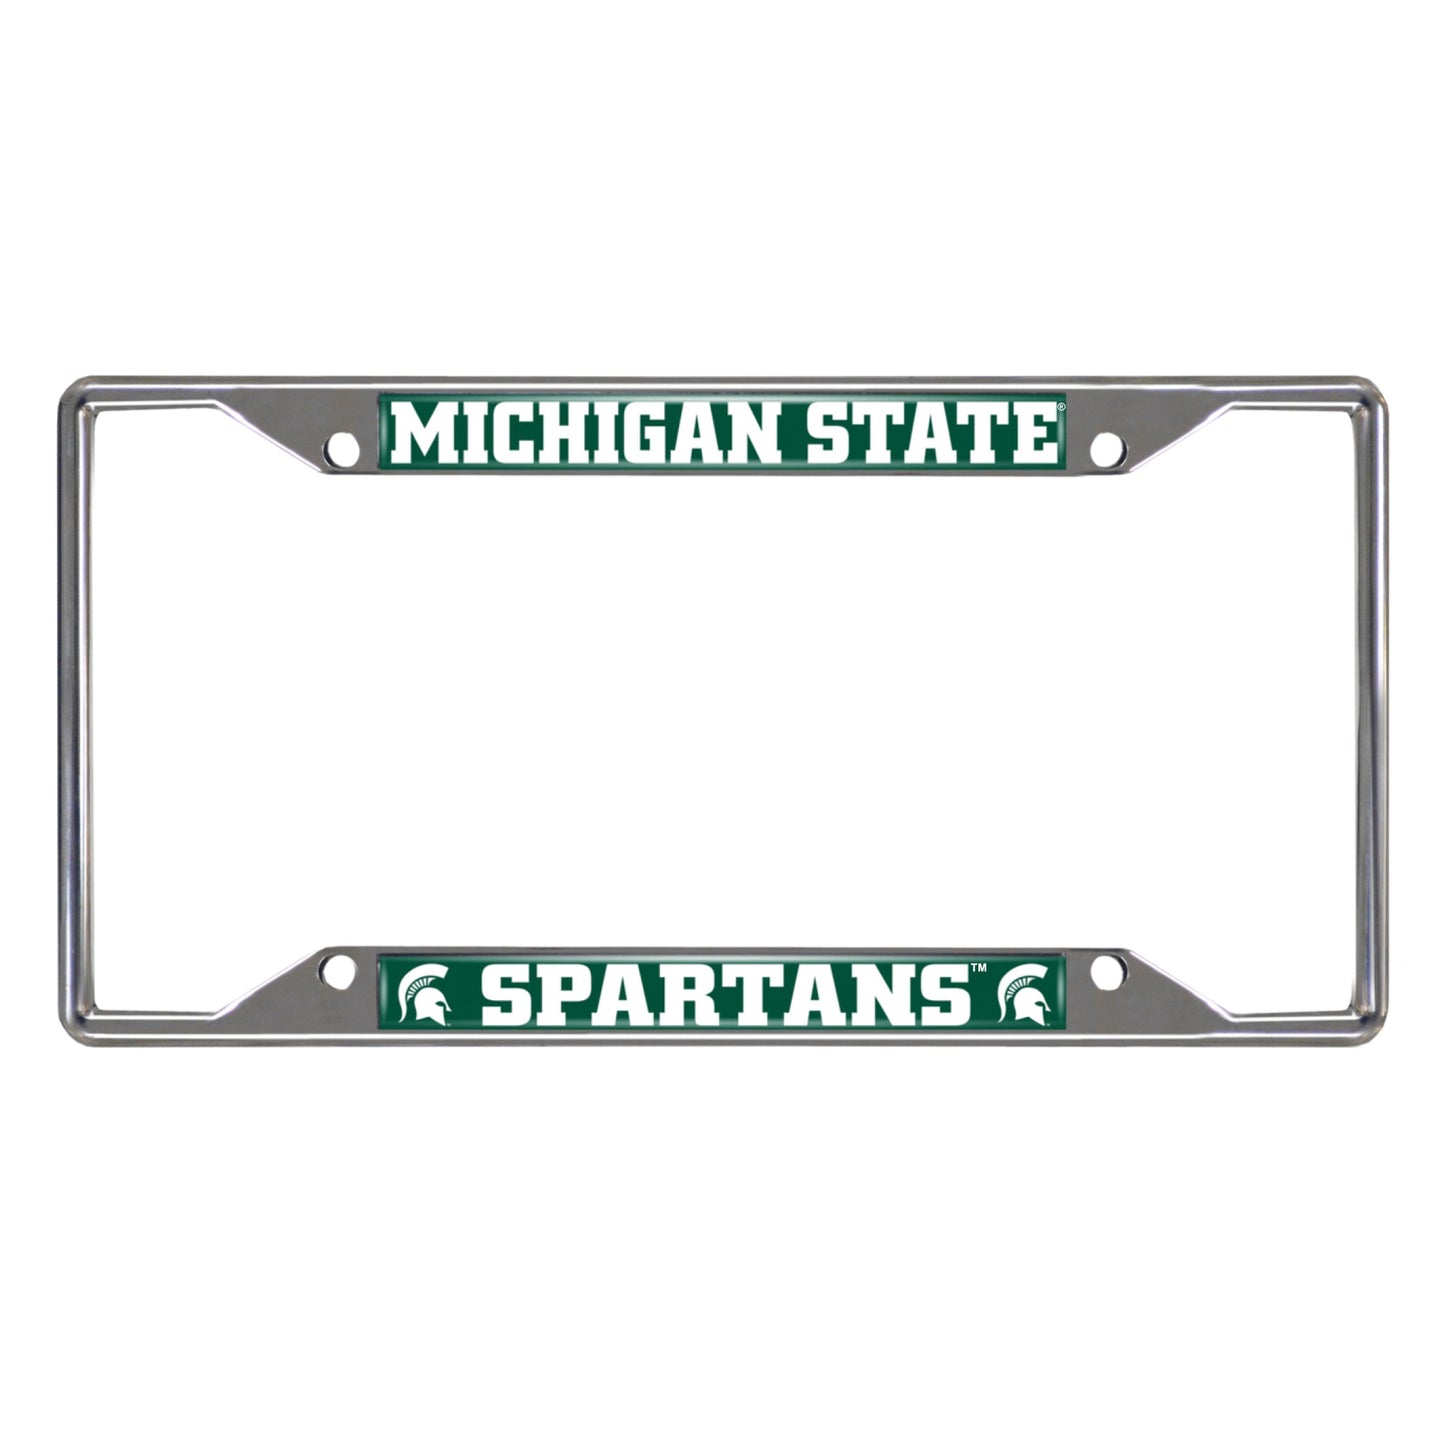 Michigan State Spartans Chrome Metal License Plate Frame, 6.25in x 12.25in